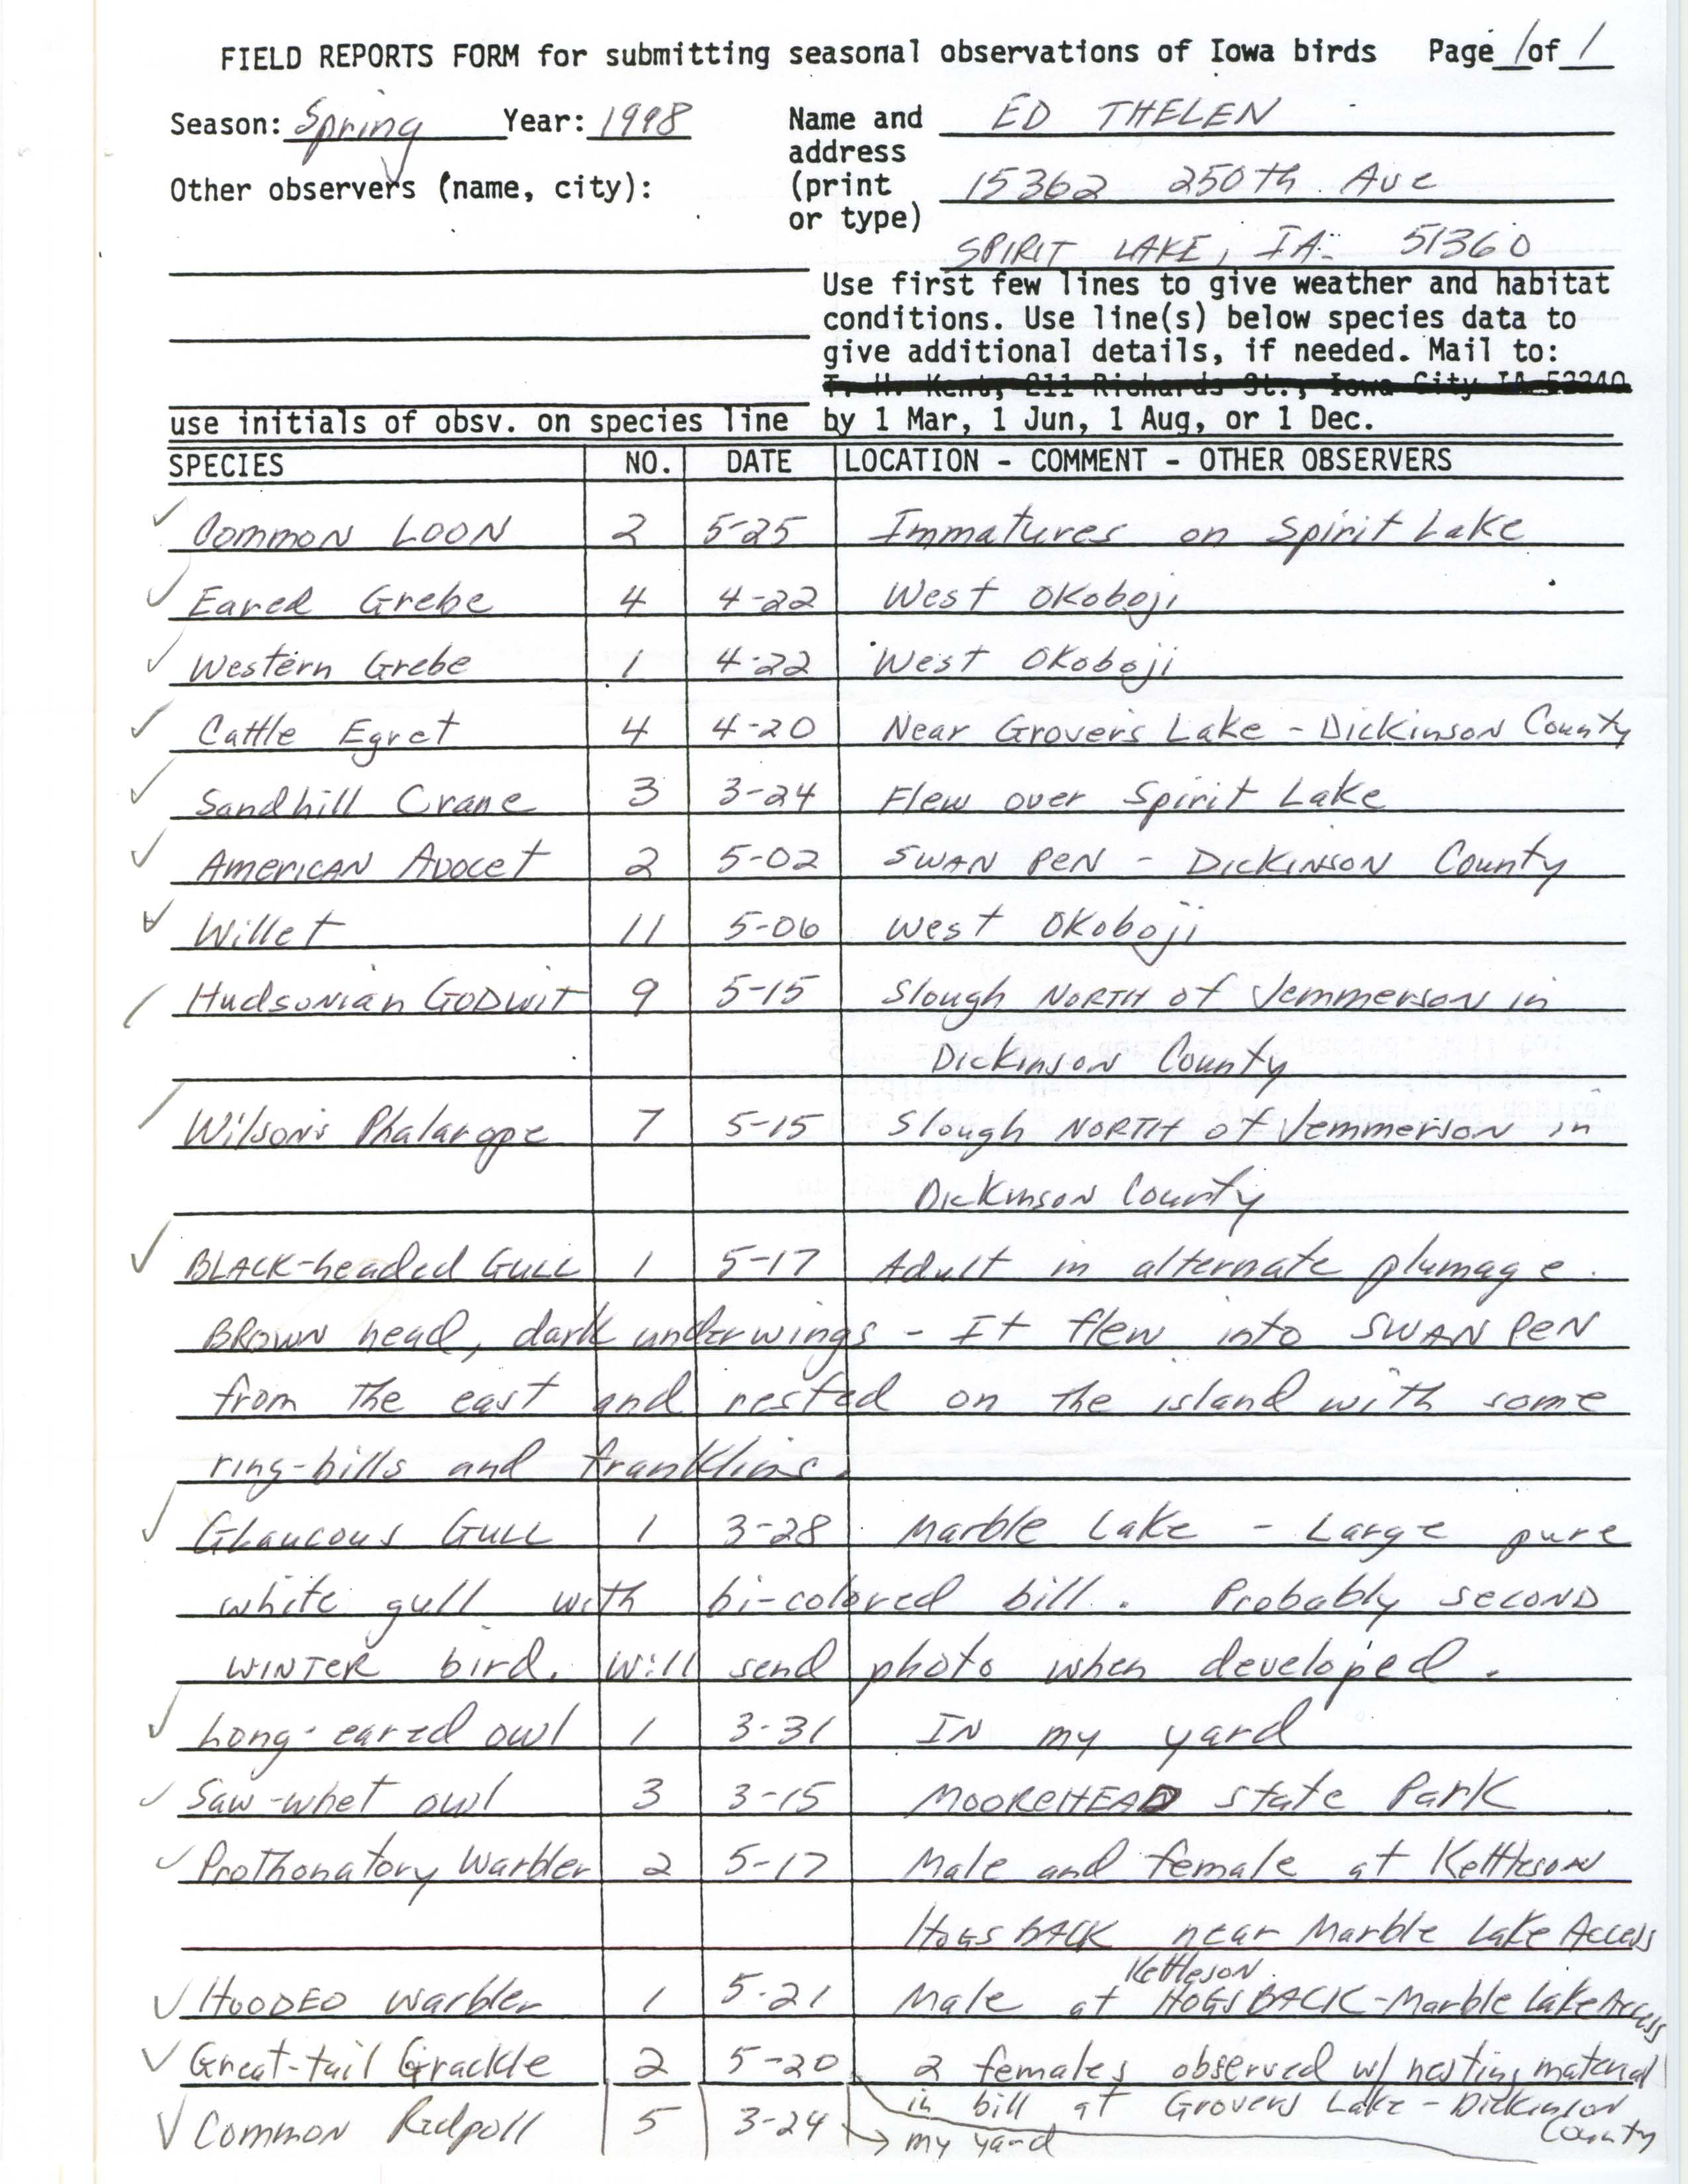 Field reports form for submitting seasonal observations of Iowa birds, Ed Thelen, spring 1998